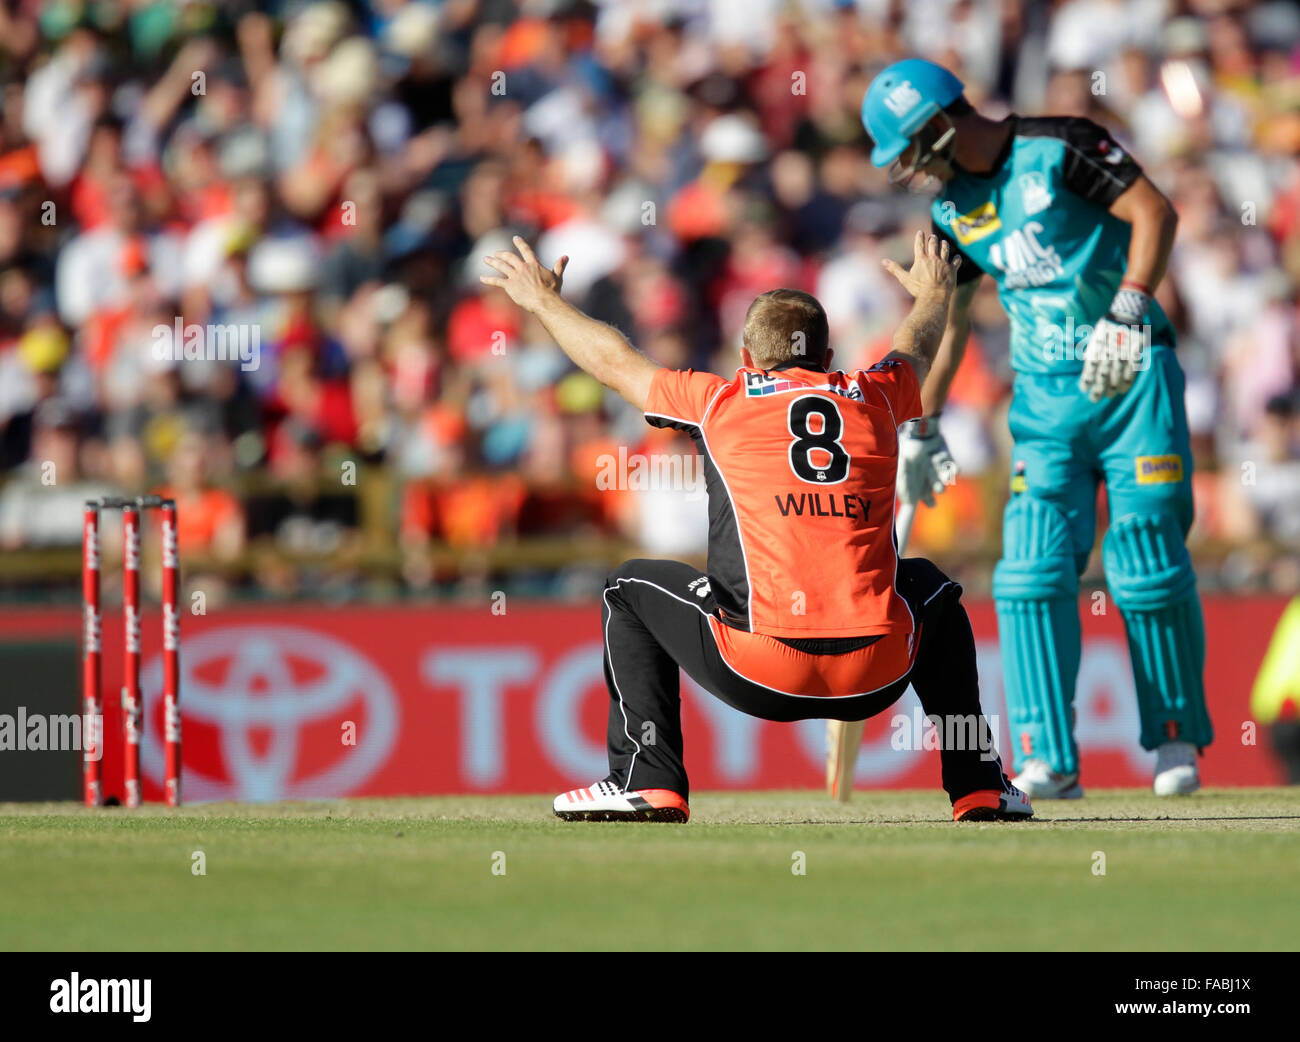 26.12.2015. Perth, Australia. Big Bash Cricker League 05, Perth Scorchers versus Brisbane Heat. David Willey appeals for an LBW during one of his overs. Stock Photo